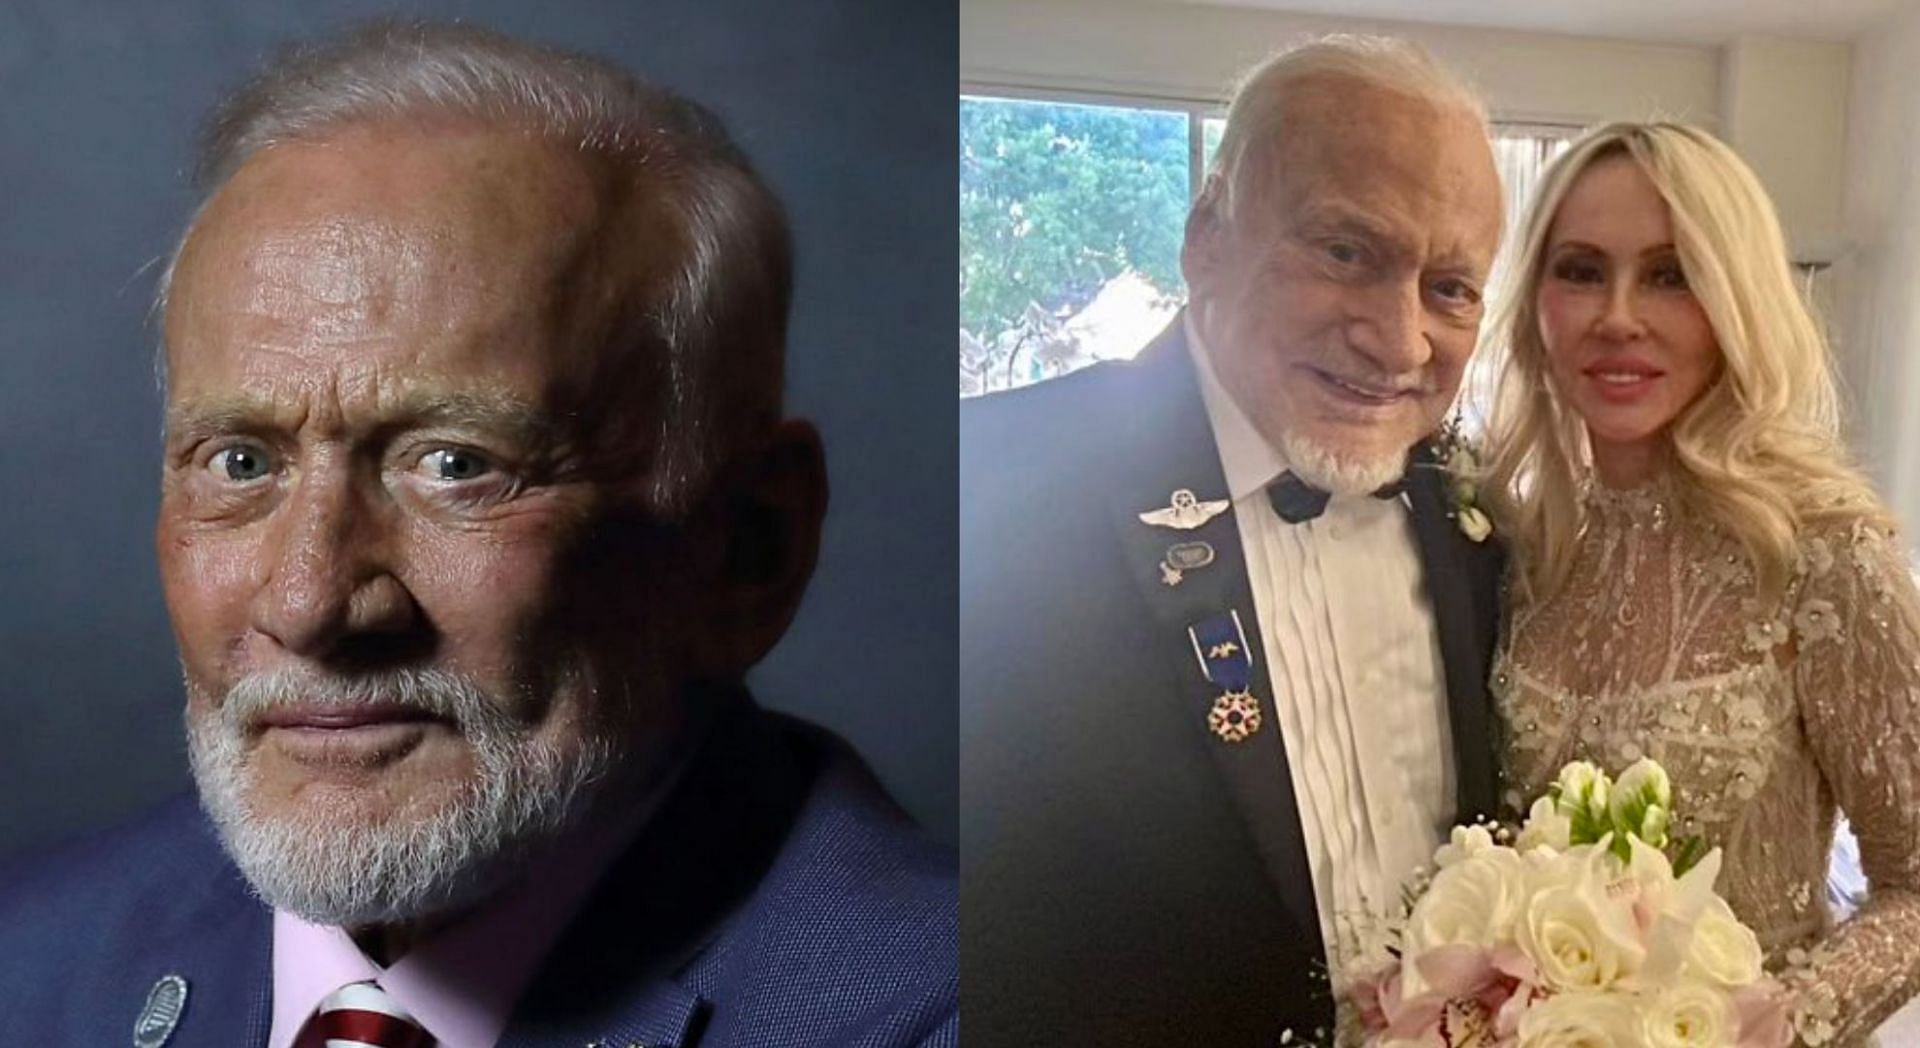 Buzz Aldrin tied the knot with Dr Anca Faur on his 93rd birthday (Image via Getty Images and Buzz Aldrin/Twitter)